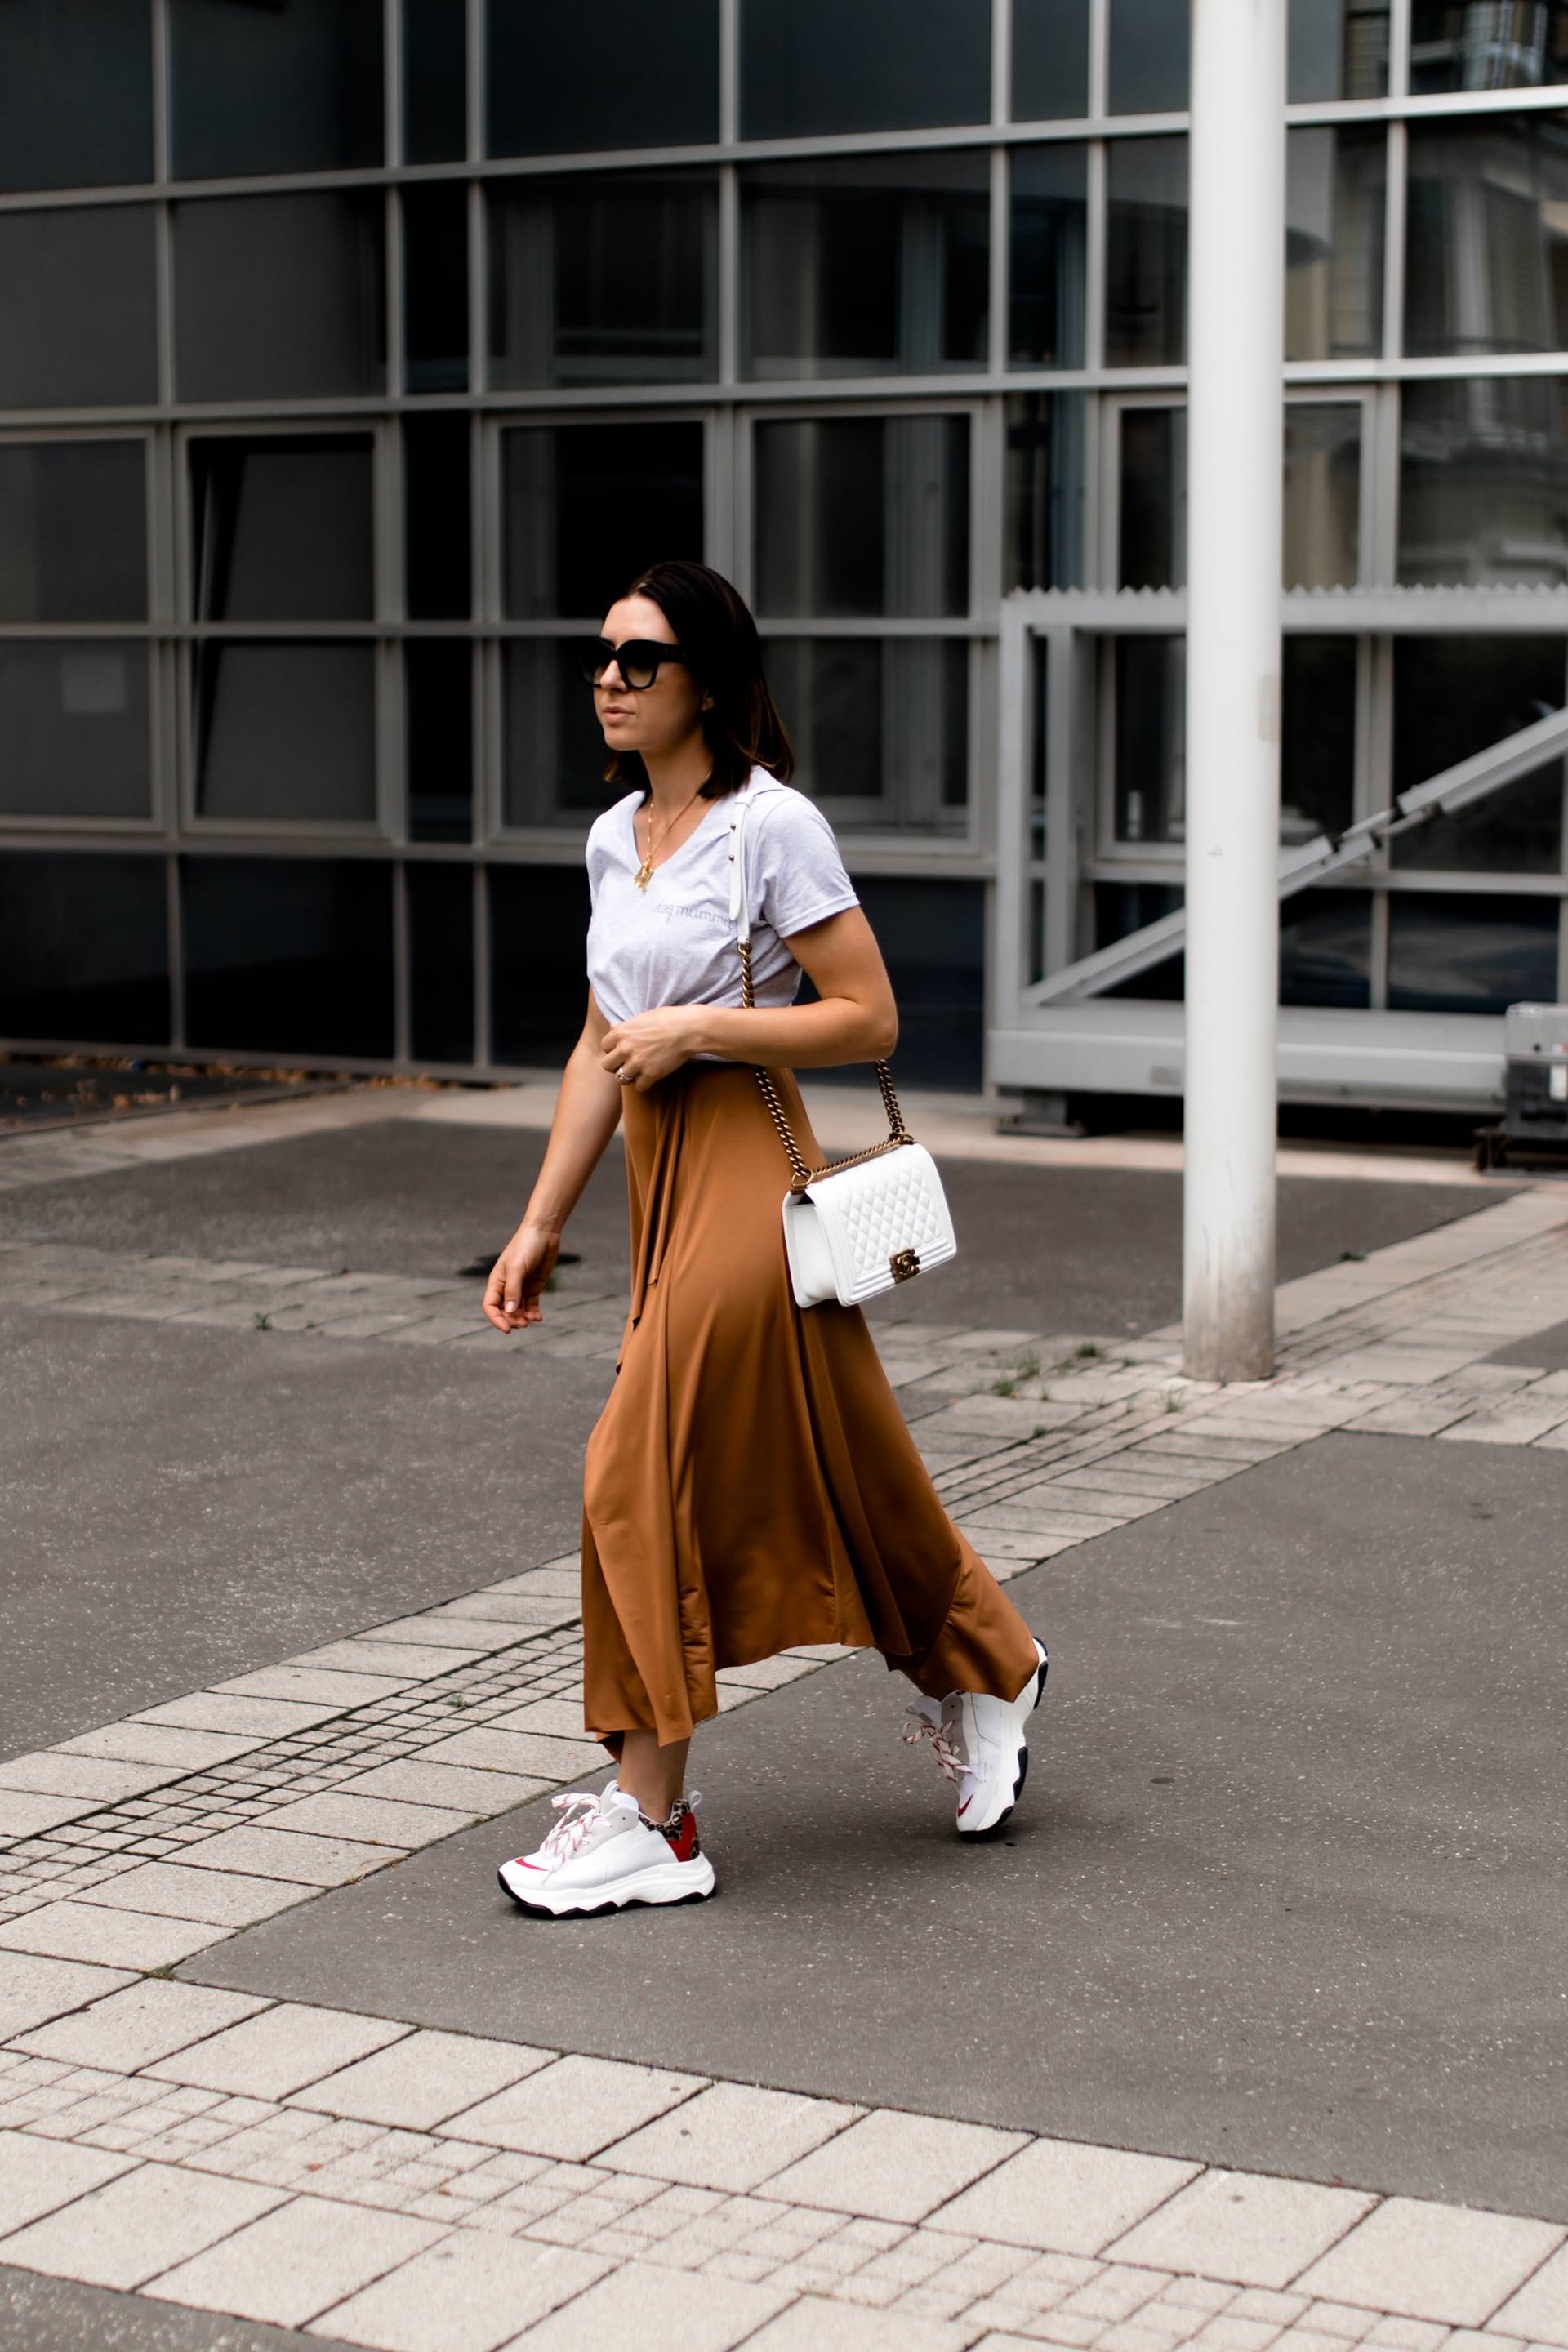 enthält unbeauftragte Werbung, Chunky Sneakers Trend, Dad Sneakers stylen, Ugly Trainers kombinieren, Sommer Outfit mit Midirock, Alltagsoutfit mit Rock und Sneakers, Chanel Boy Tasche, Streetstyle, Modeblogger, www.whoismocca.com #chunky #sneakers #sommermode #ootd #modetrends #chanel